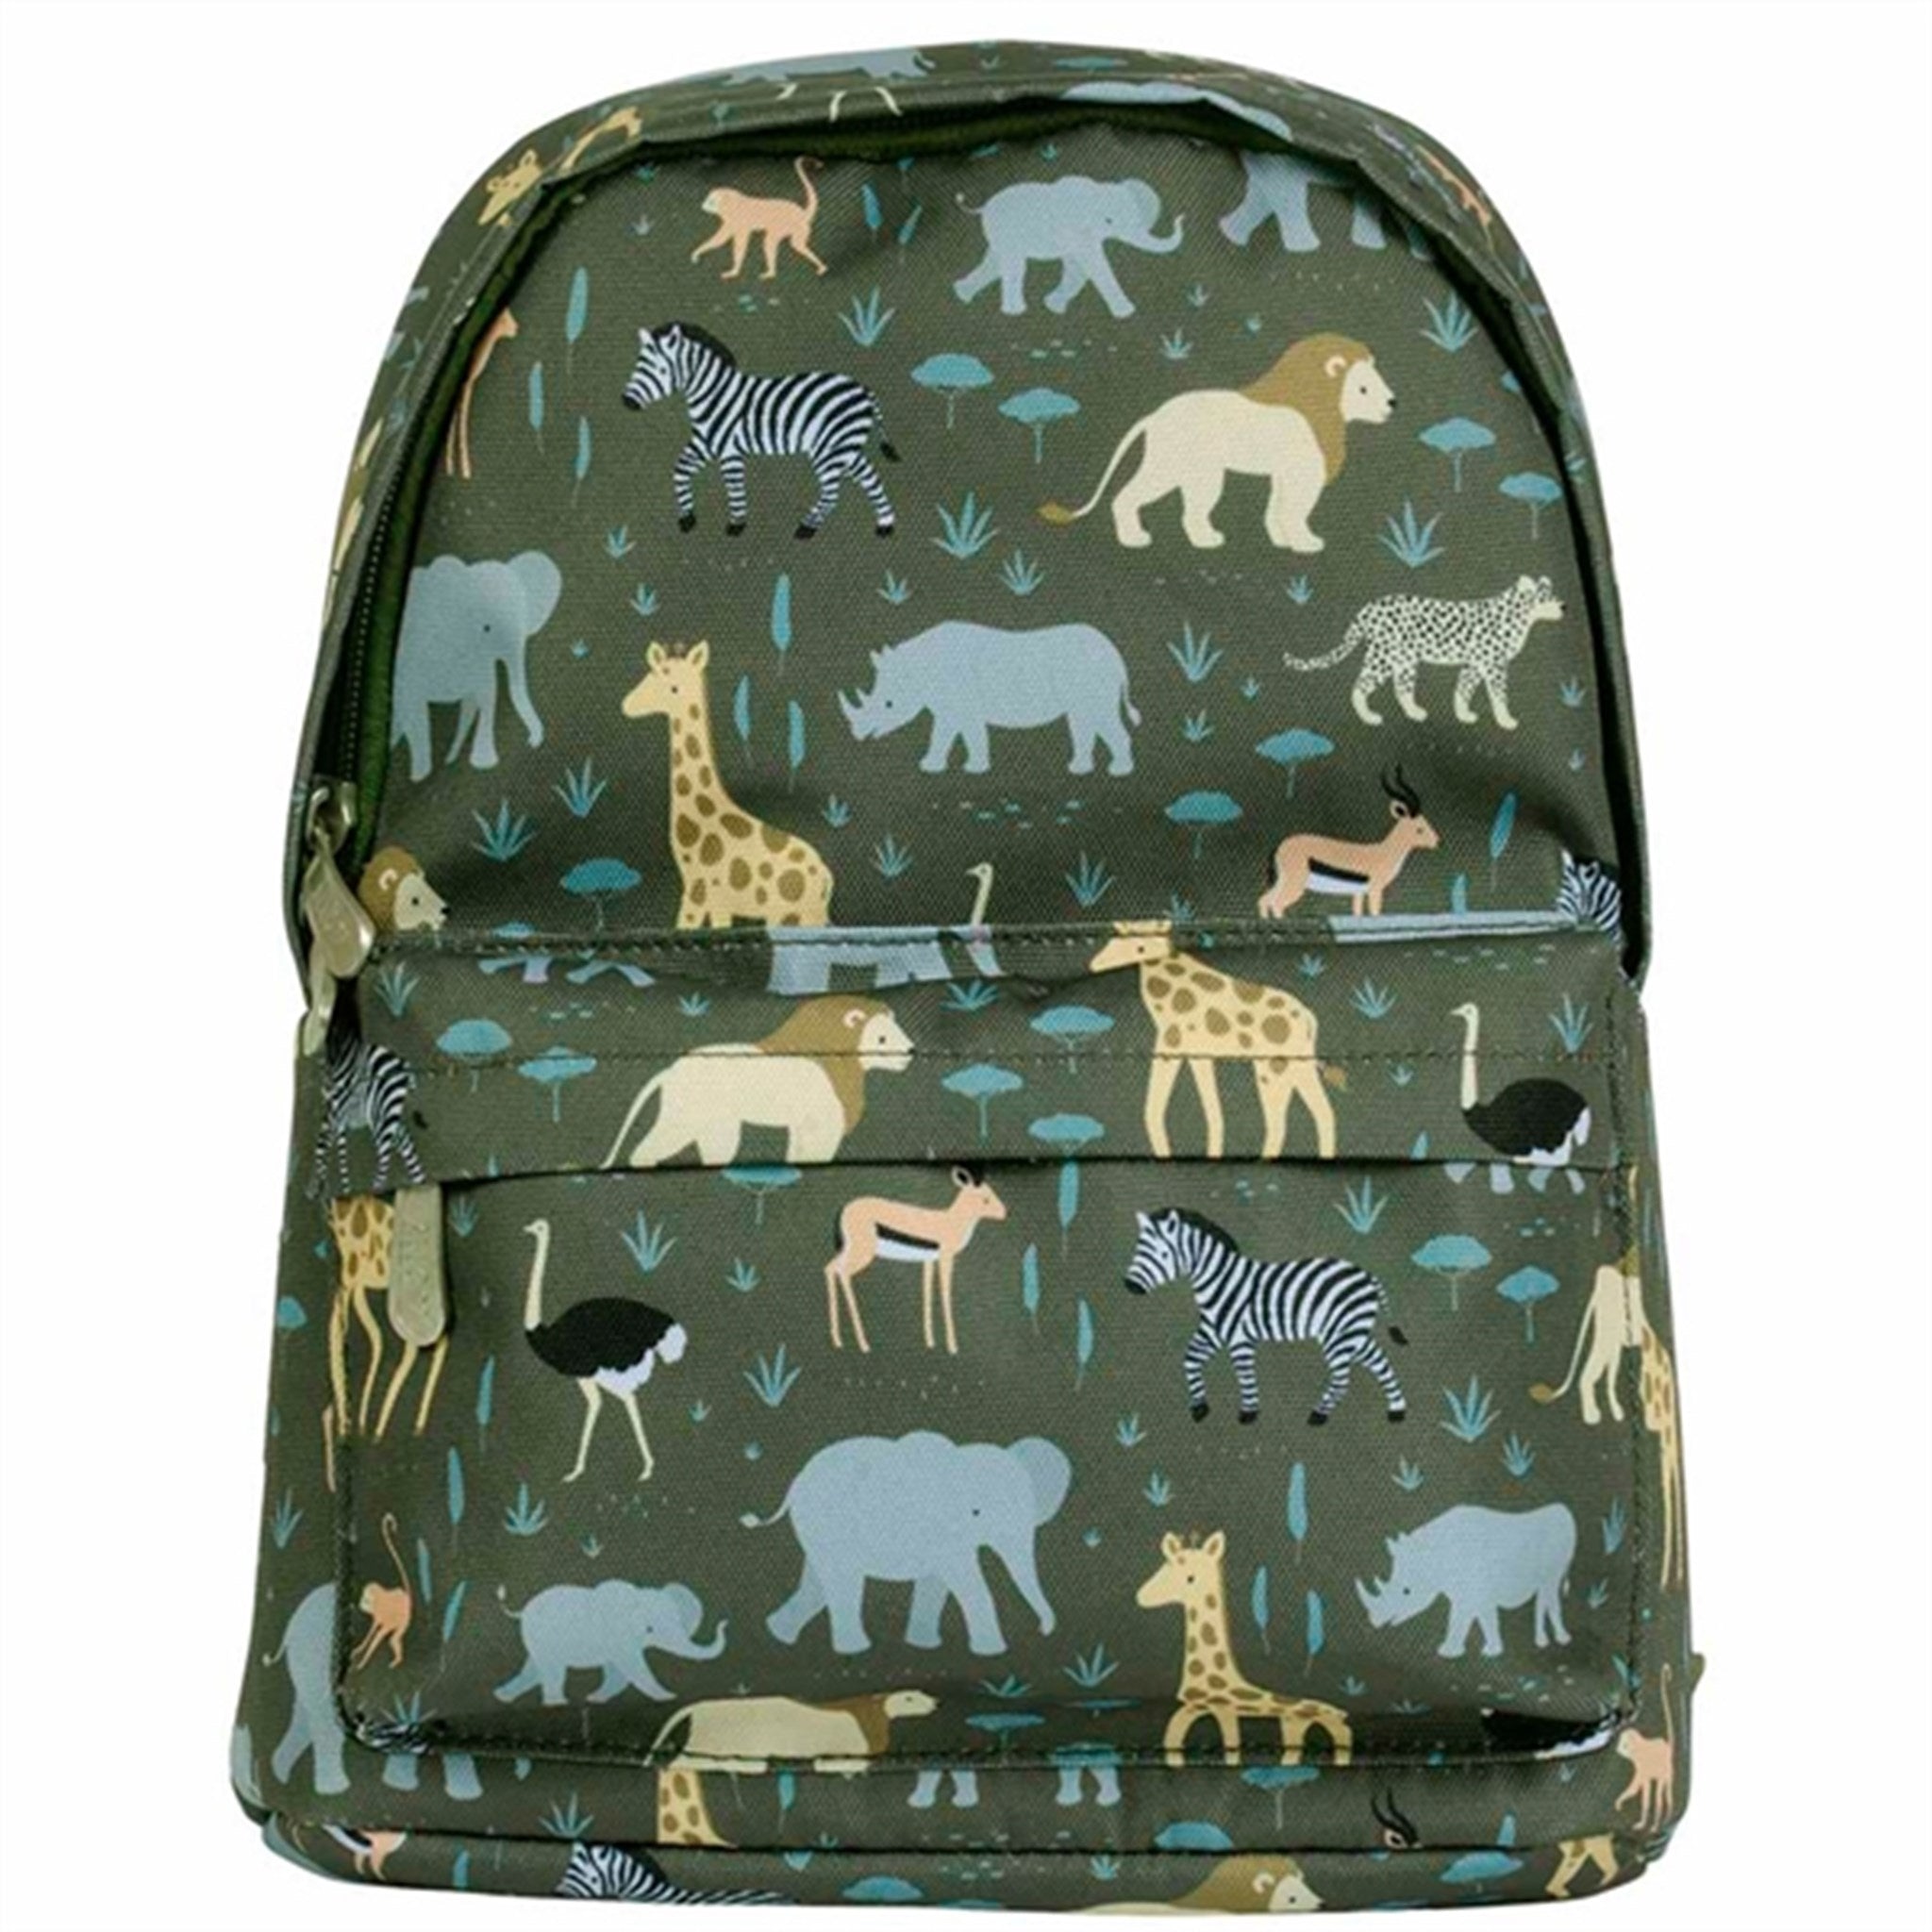 A Little Lovely Company Backpack Small Savanna